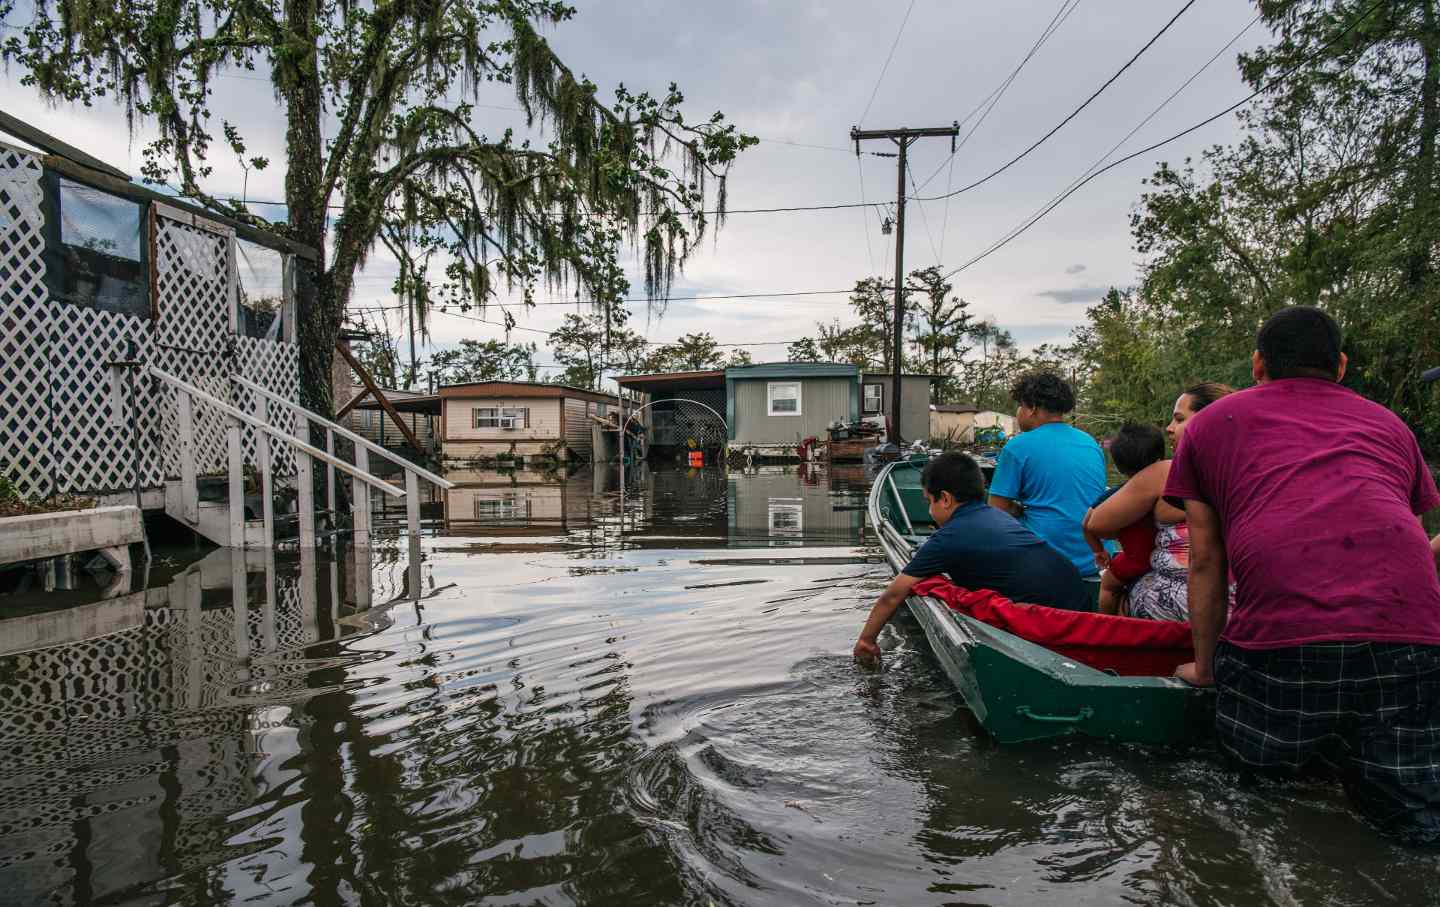 A New Orleans family travels to their home near New Orleans, La., after it was flooded during Hurricane Ida on September 13, 2021.